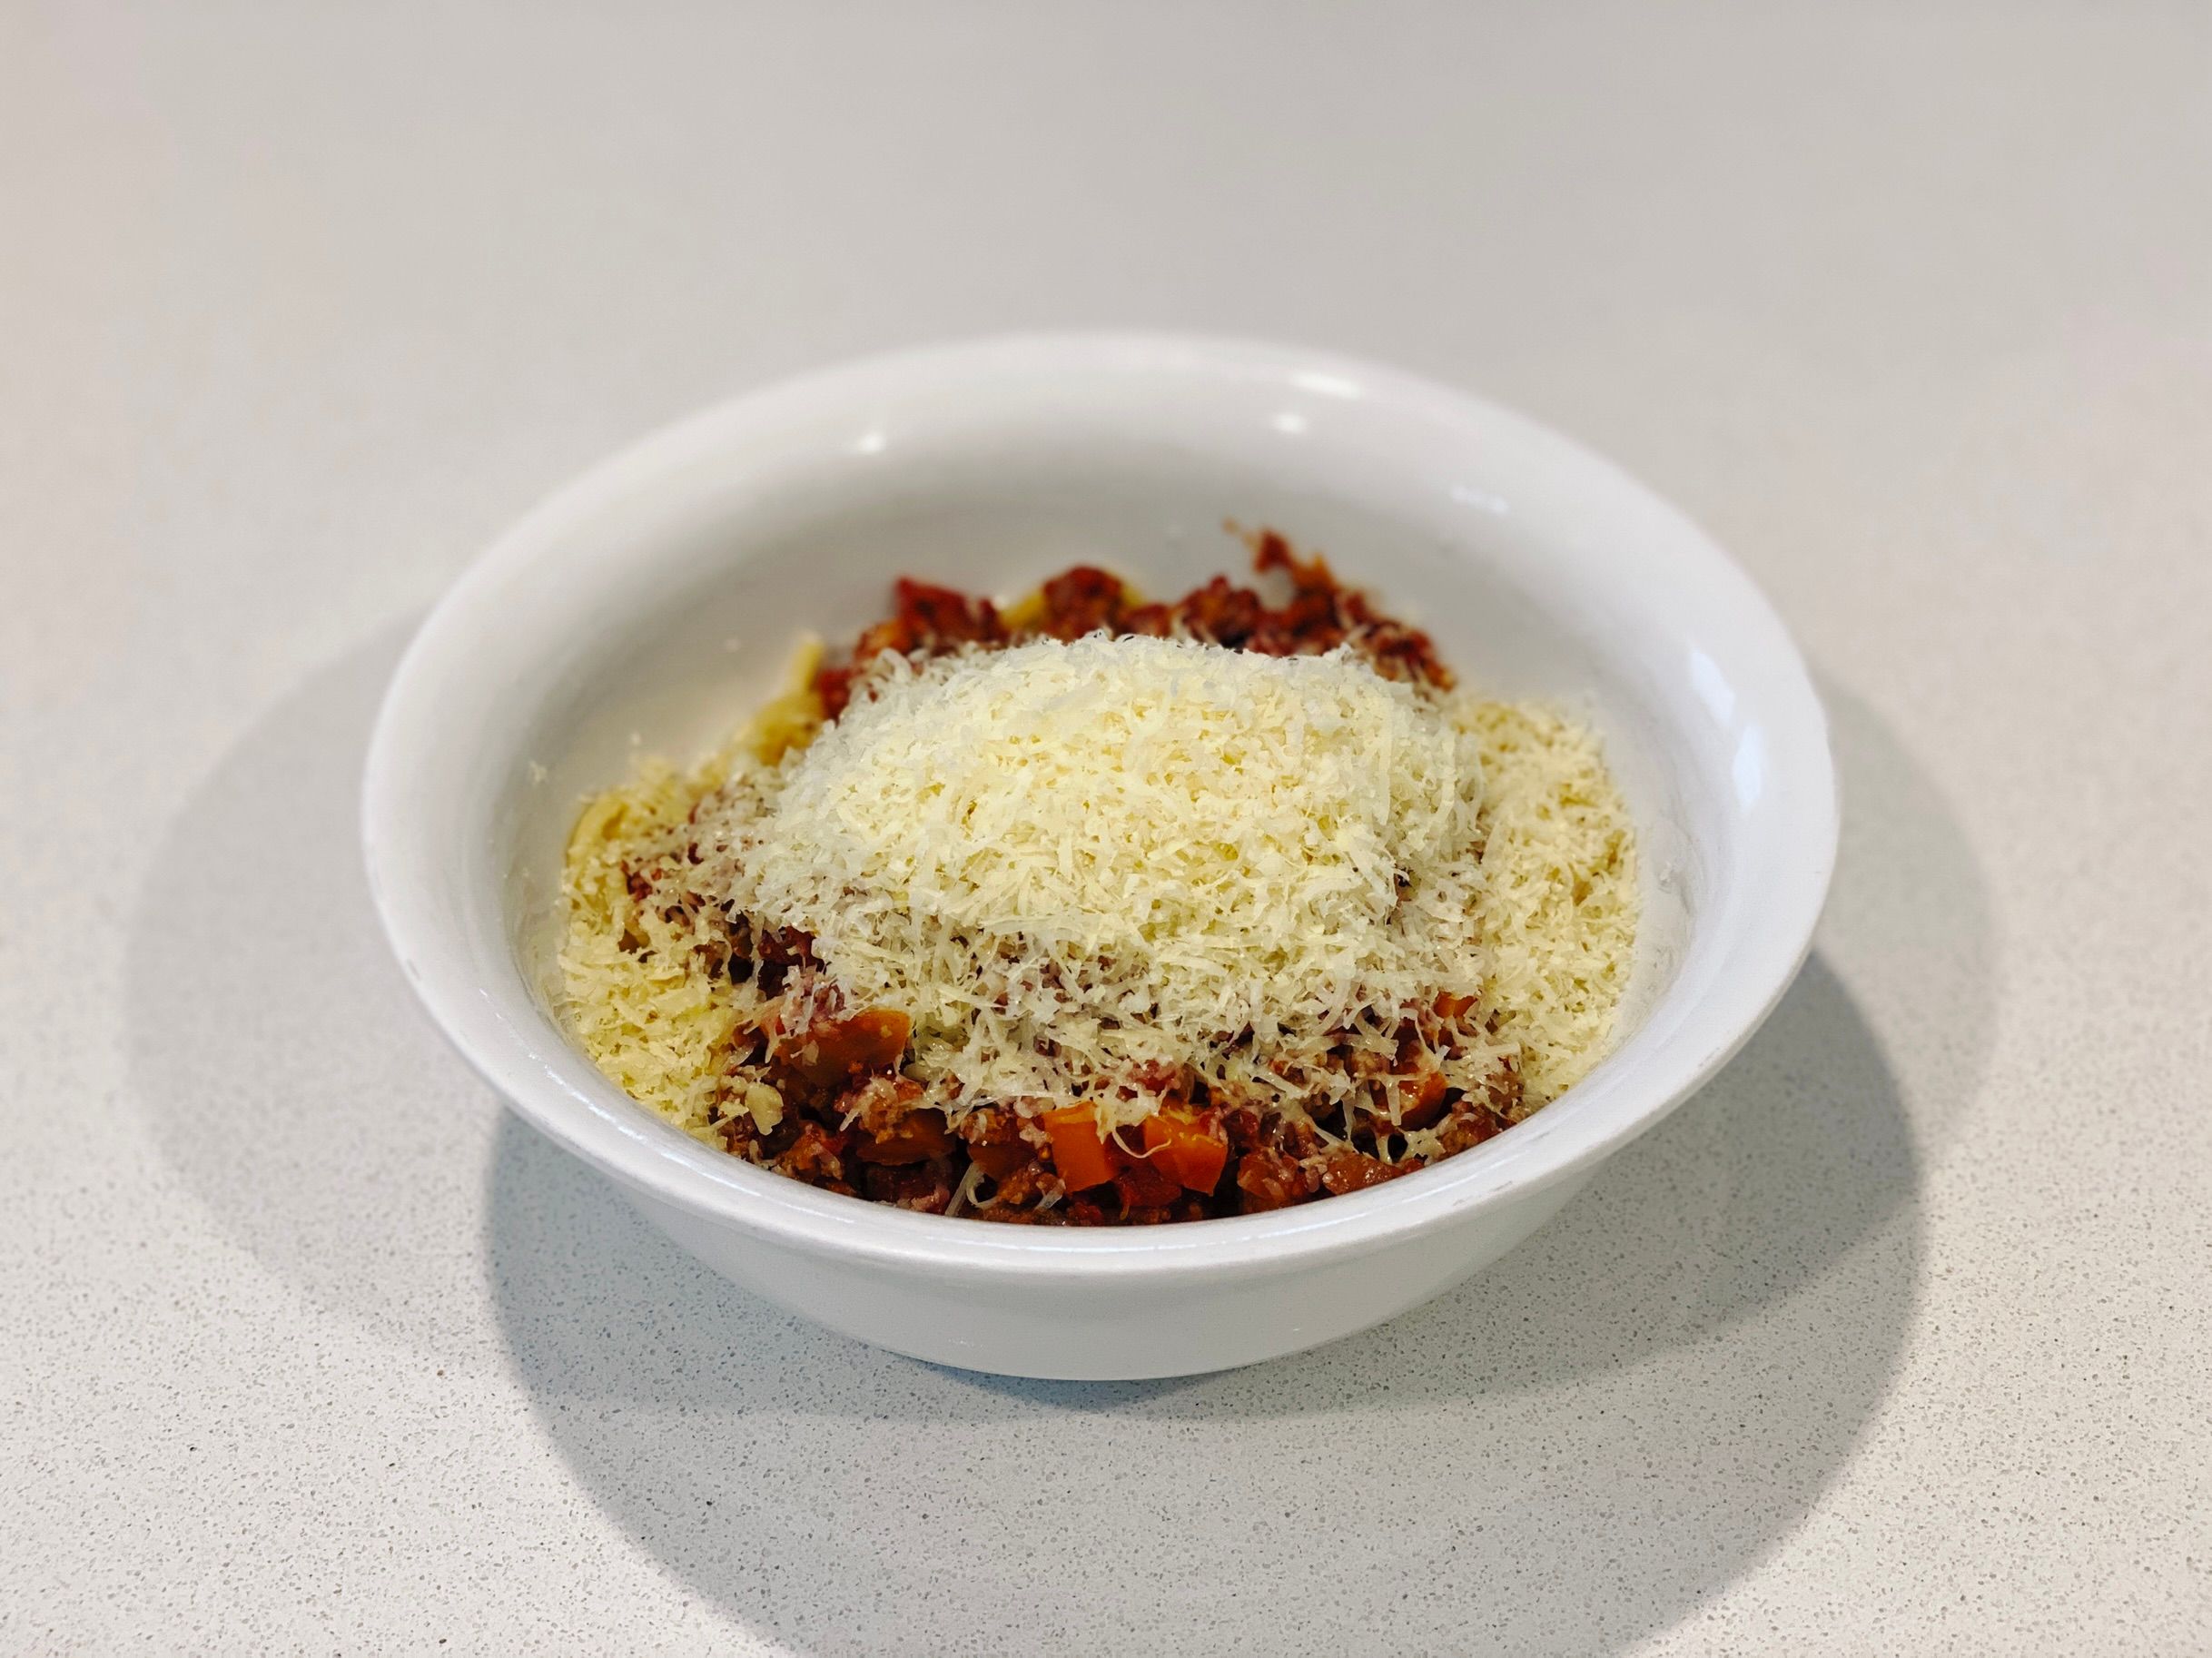 A photo of a bowl of spaghetti with bolognese sauce on top, all covered in grated Parmesan cheese.